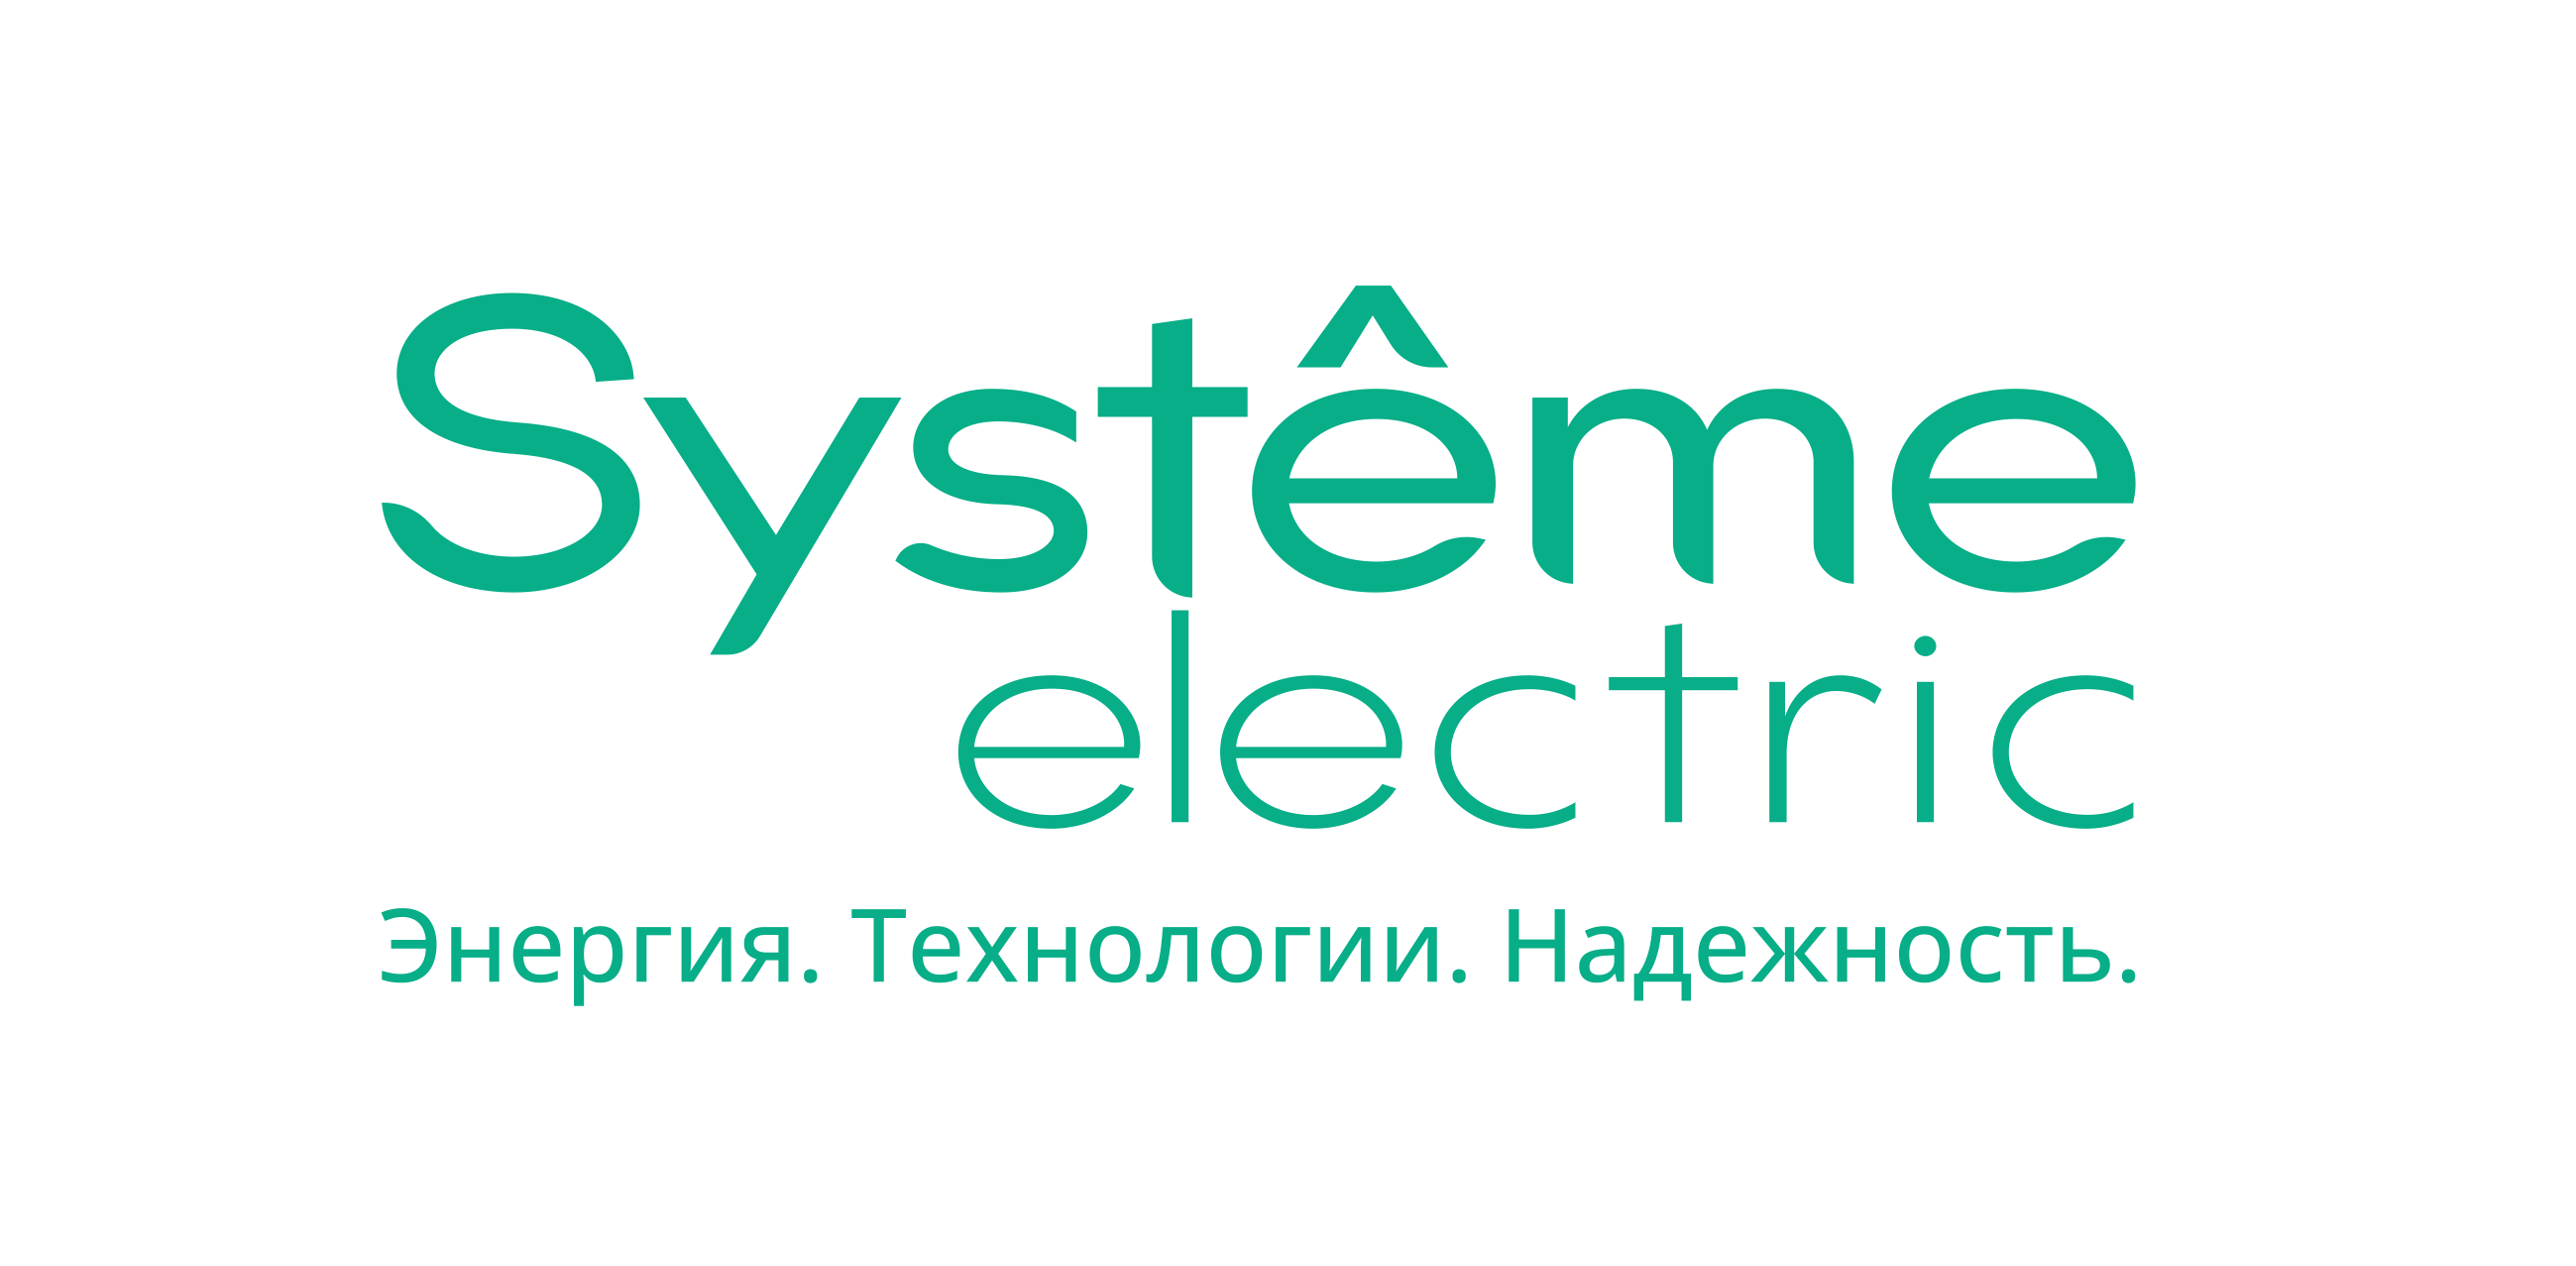 SYSTEME ELECTRIC